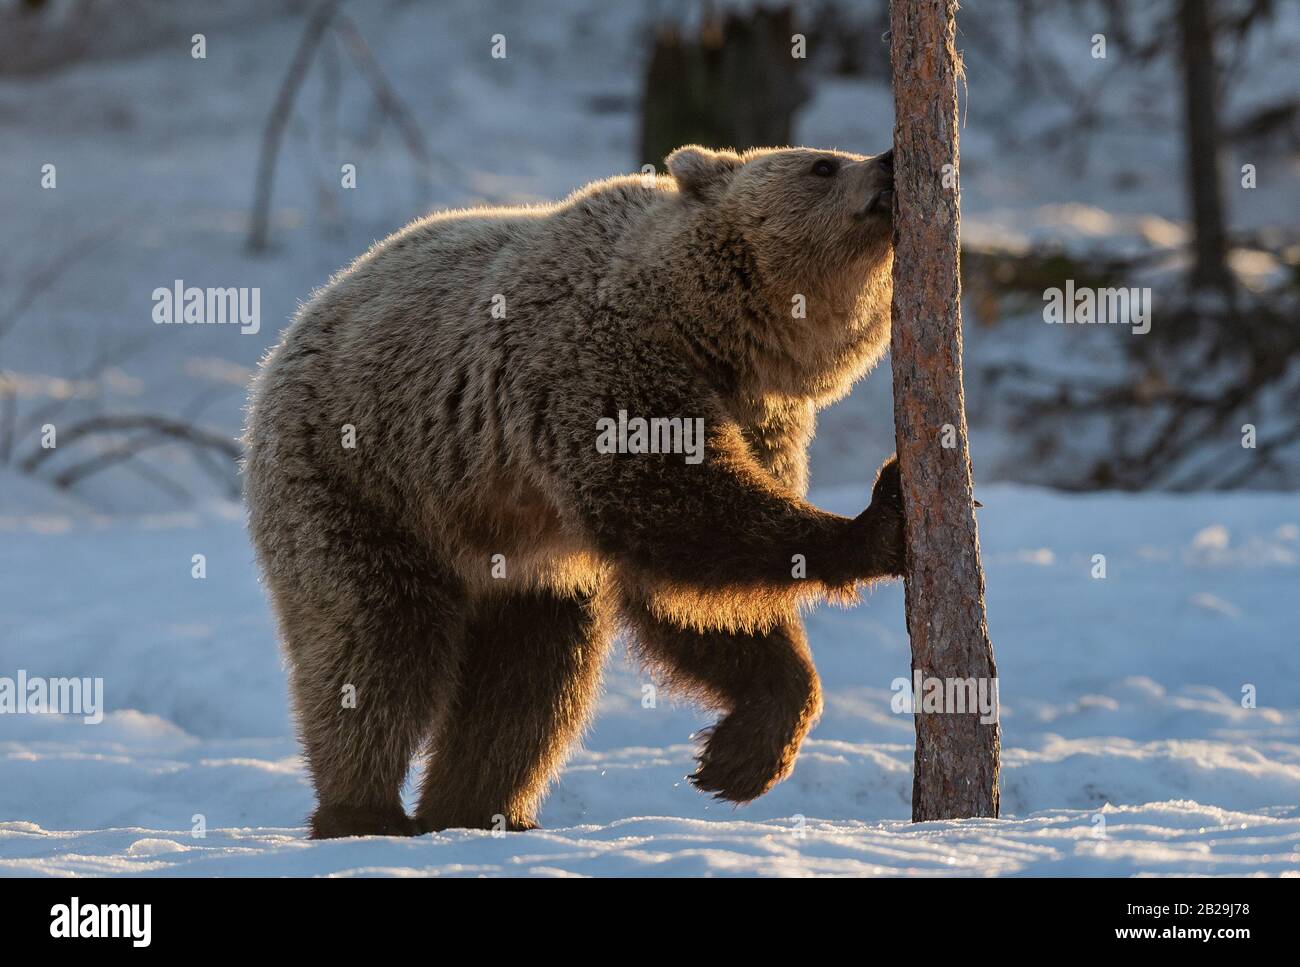 The bear sniffs a tree. Brown bear in the winter forest at sunset. Scientific name: Ursus arctos. Natural habitat. Winter season. Stock Photo